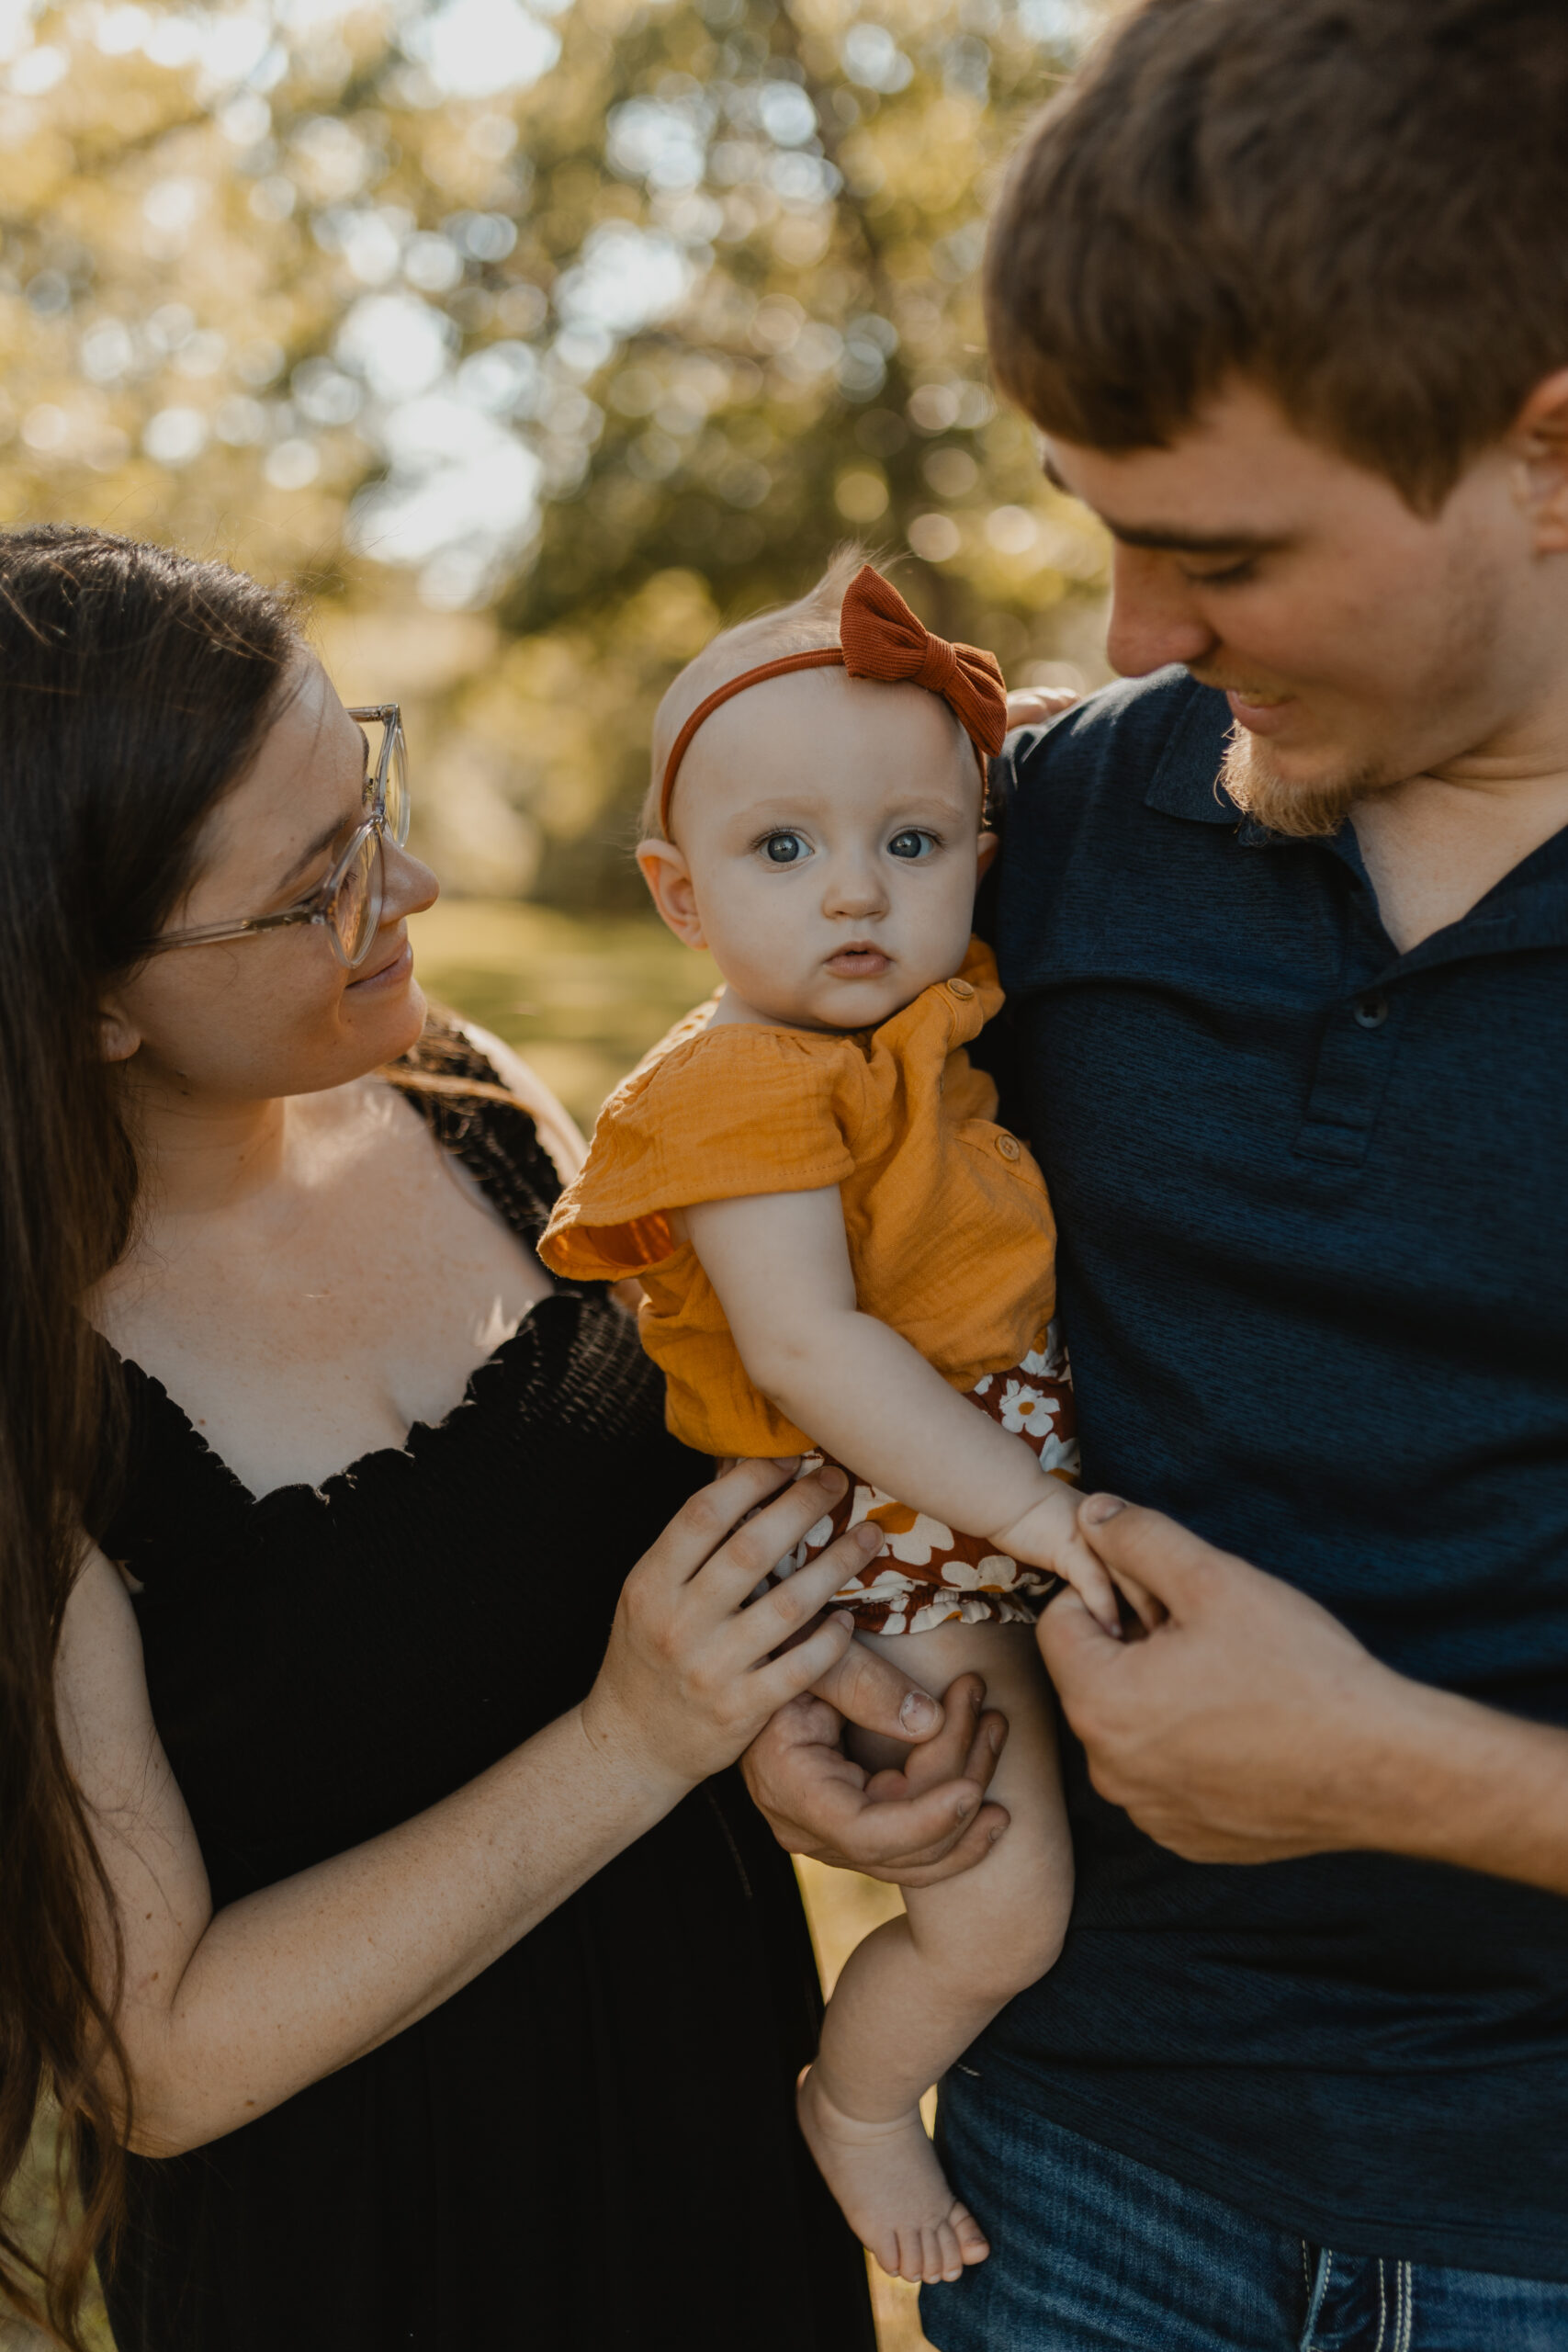 wife wearing black dress standing next to husband wearing navy shirt, holding baby girl in bright orange outfit 